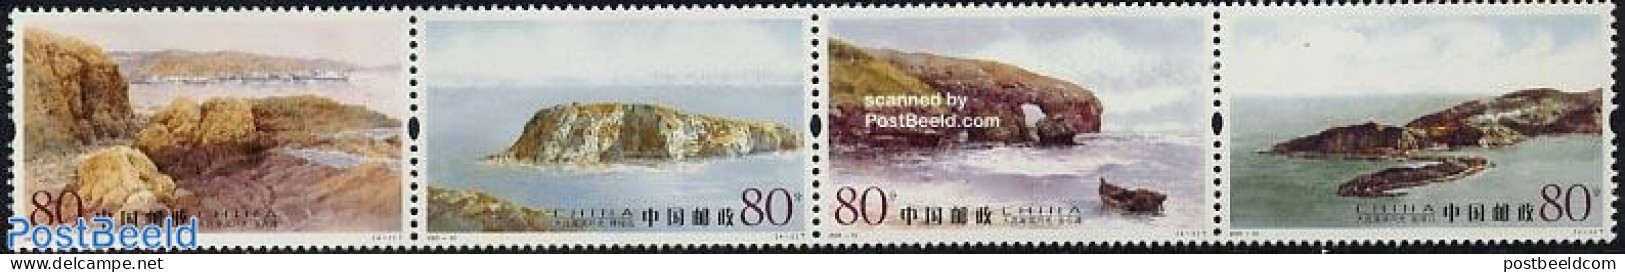 China People’s Republic 2005 Dalian Landscapes 4v [:::], Mint NH - Unused Stamps